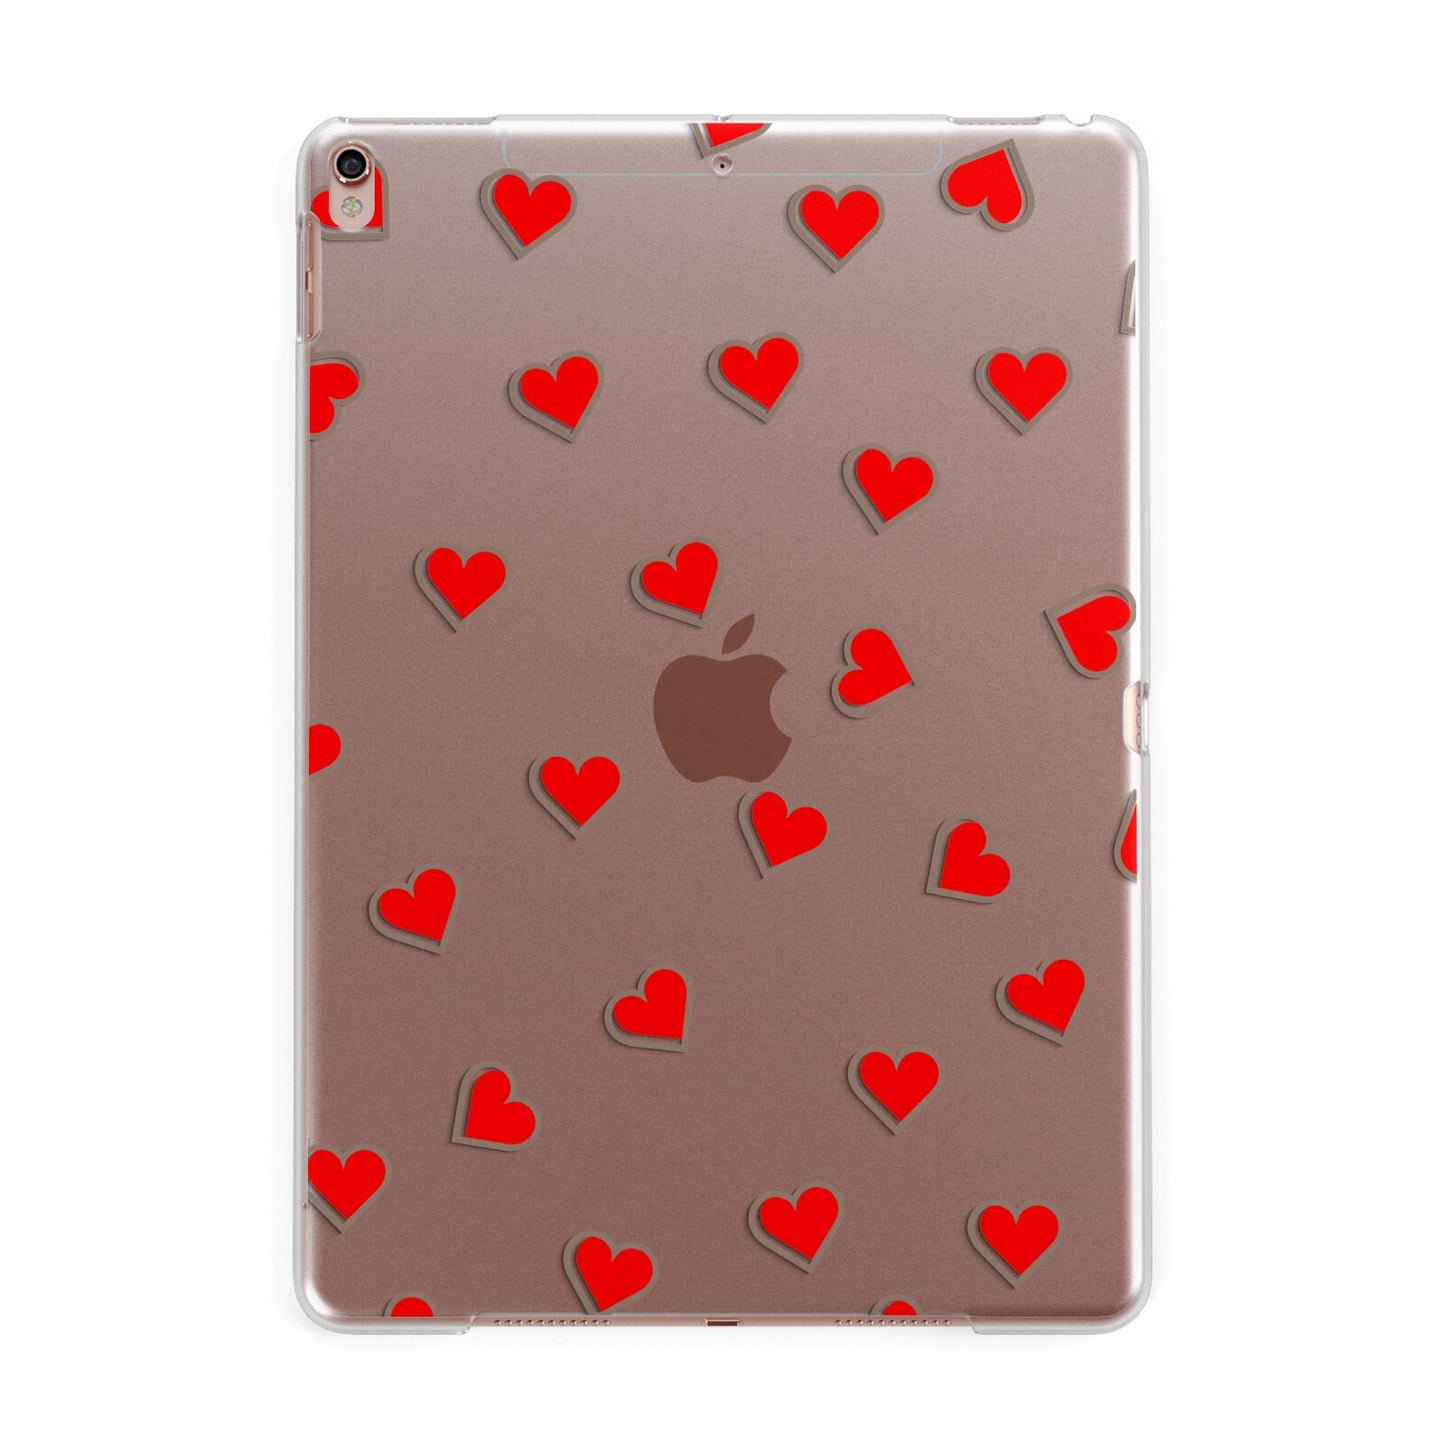 Cute Red Hearts Apple iPad Rose Gold Case